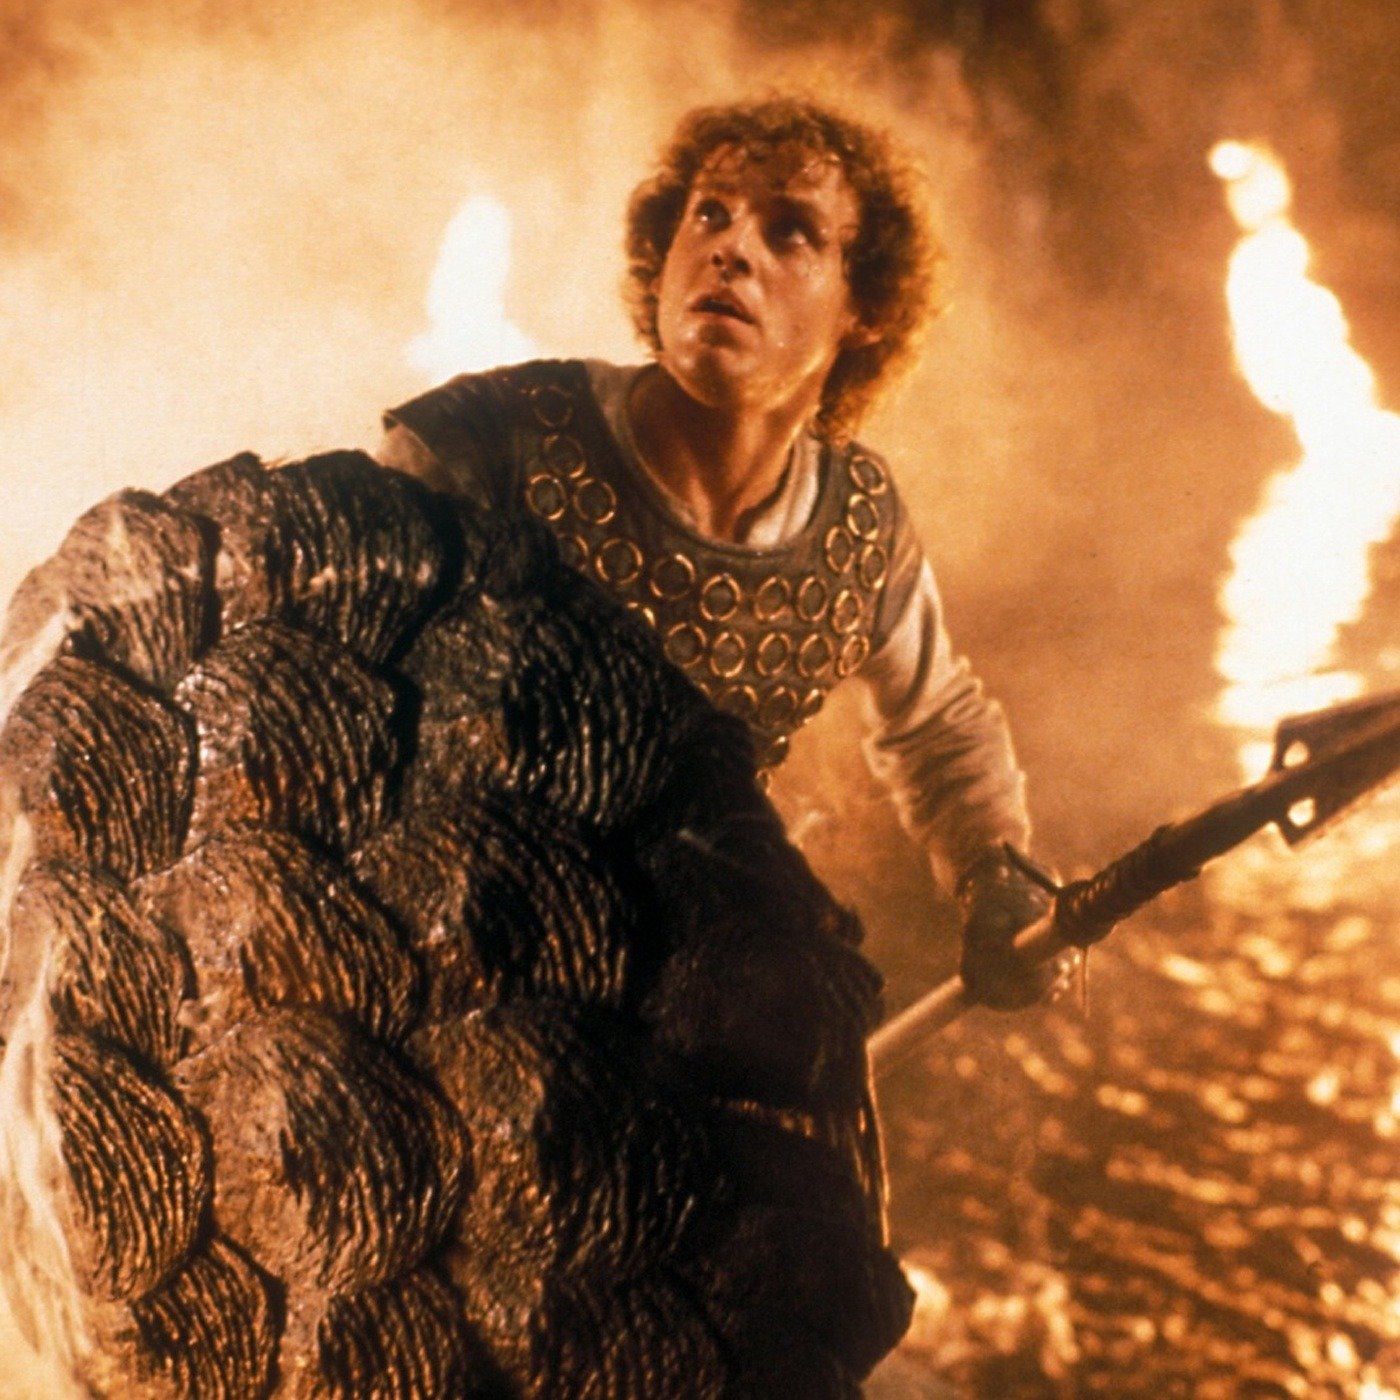 50 Movies About Dragons You Need To See